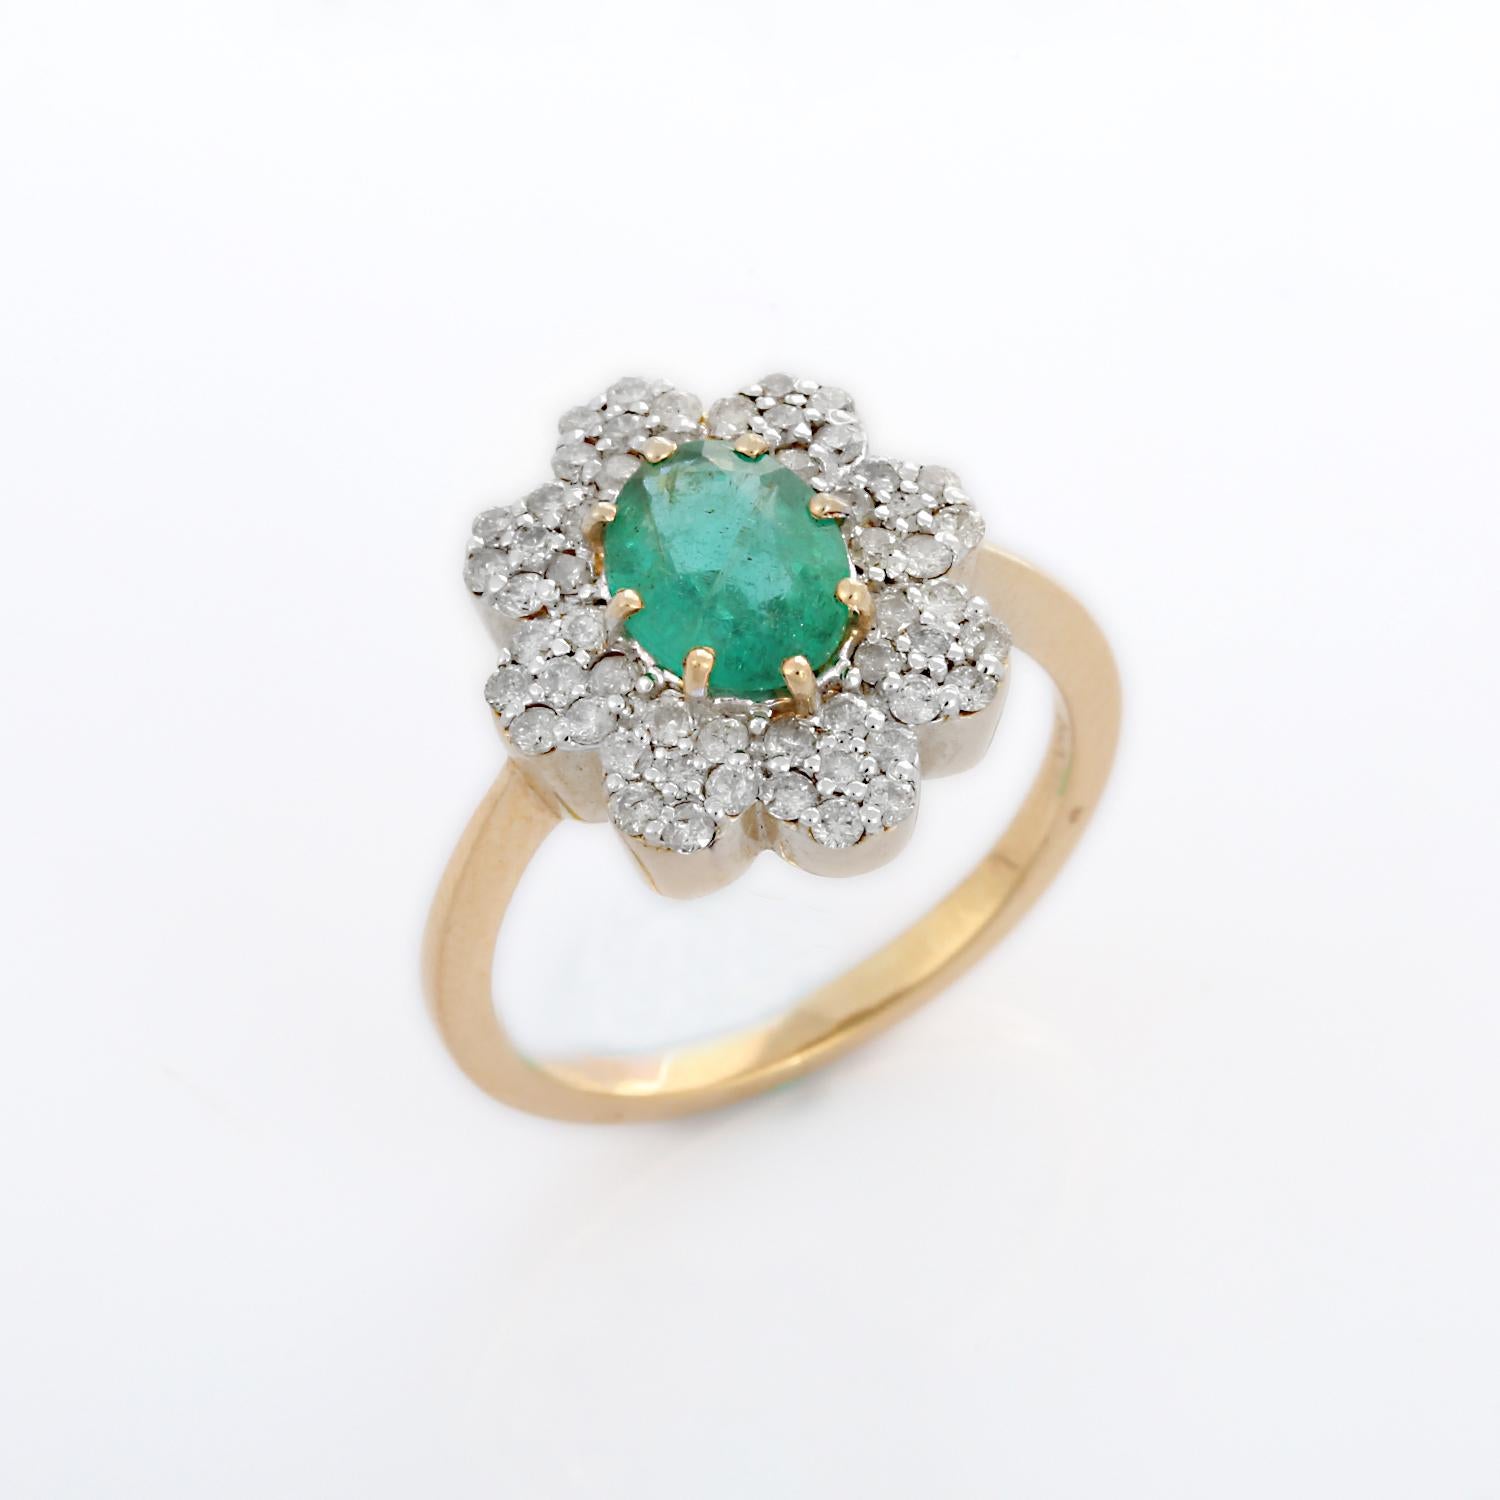 For Sale:  Exquisite 14K Solid Yellow Gold Emerald Ring with Clustered Diamonds 7